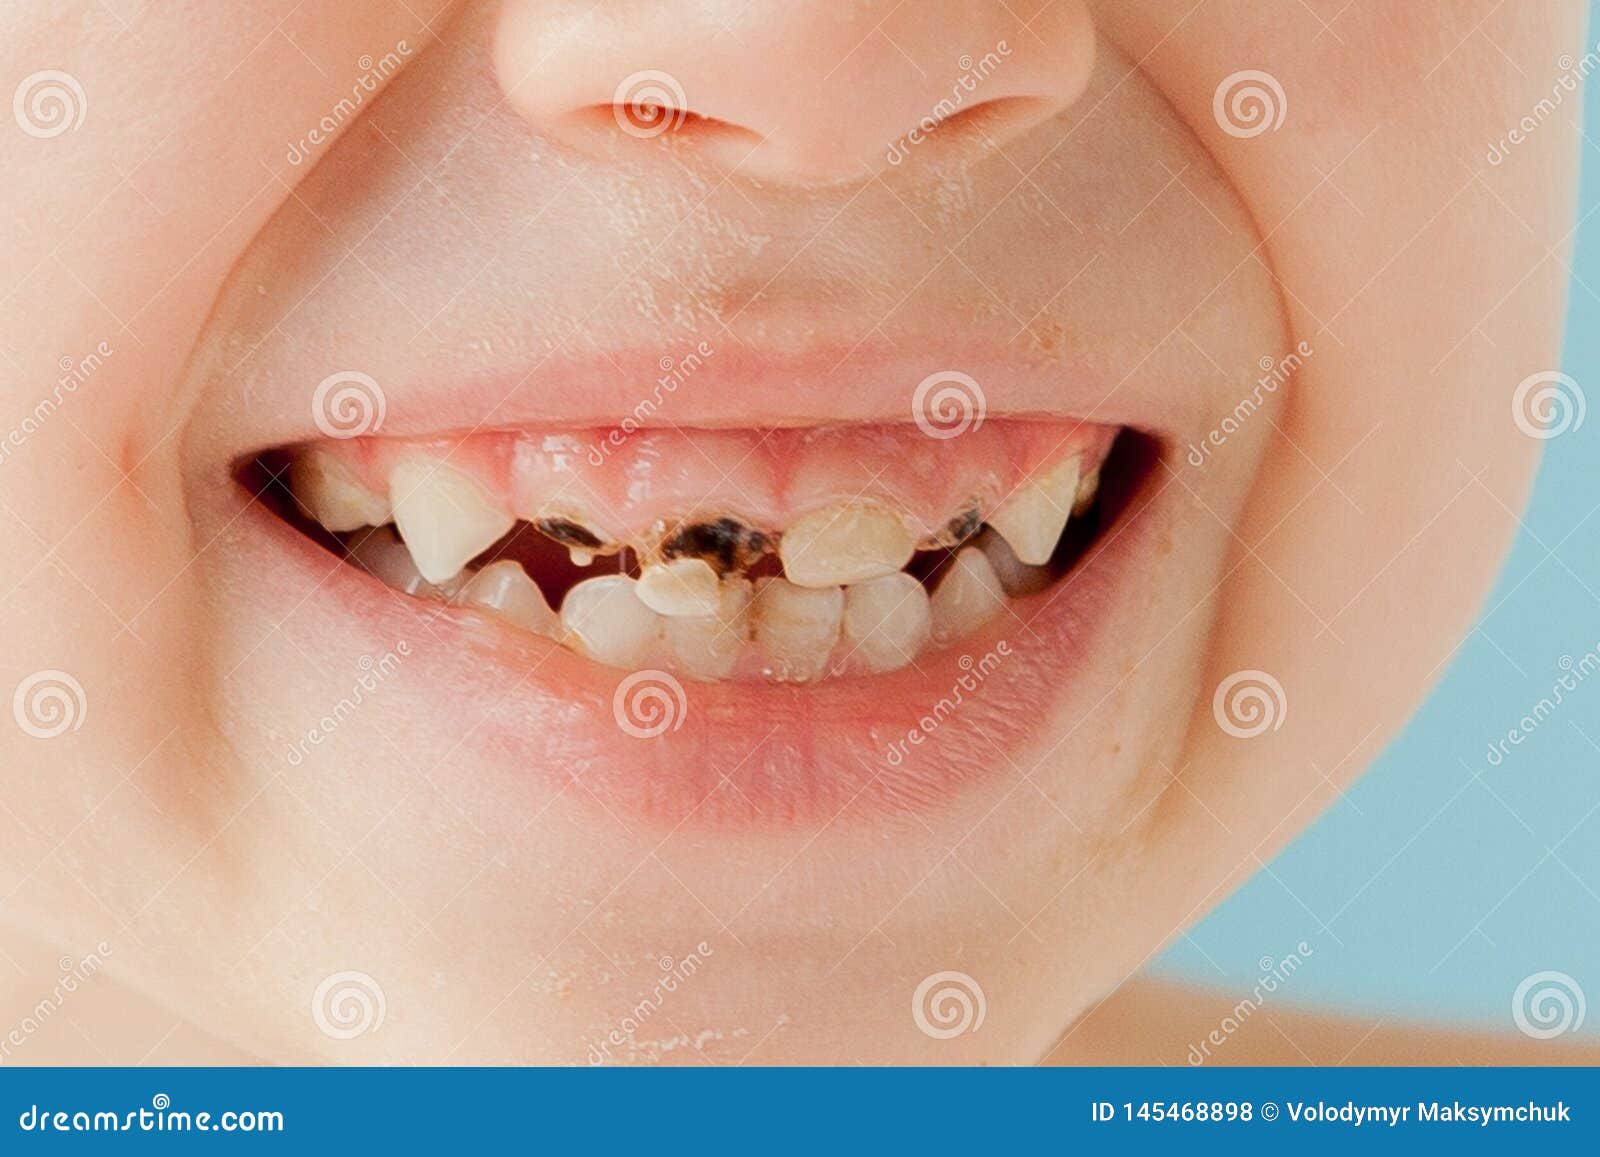 close up shot of baby teeth with caries